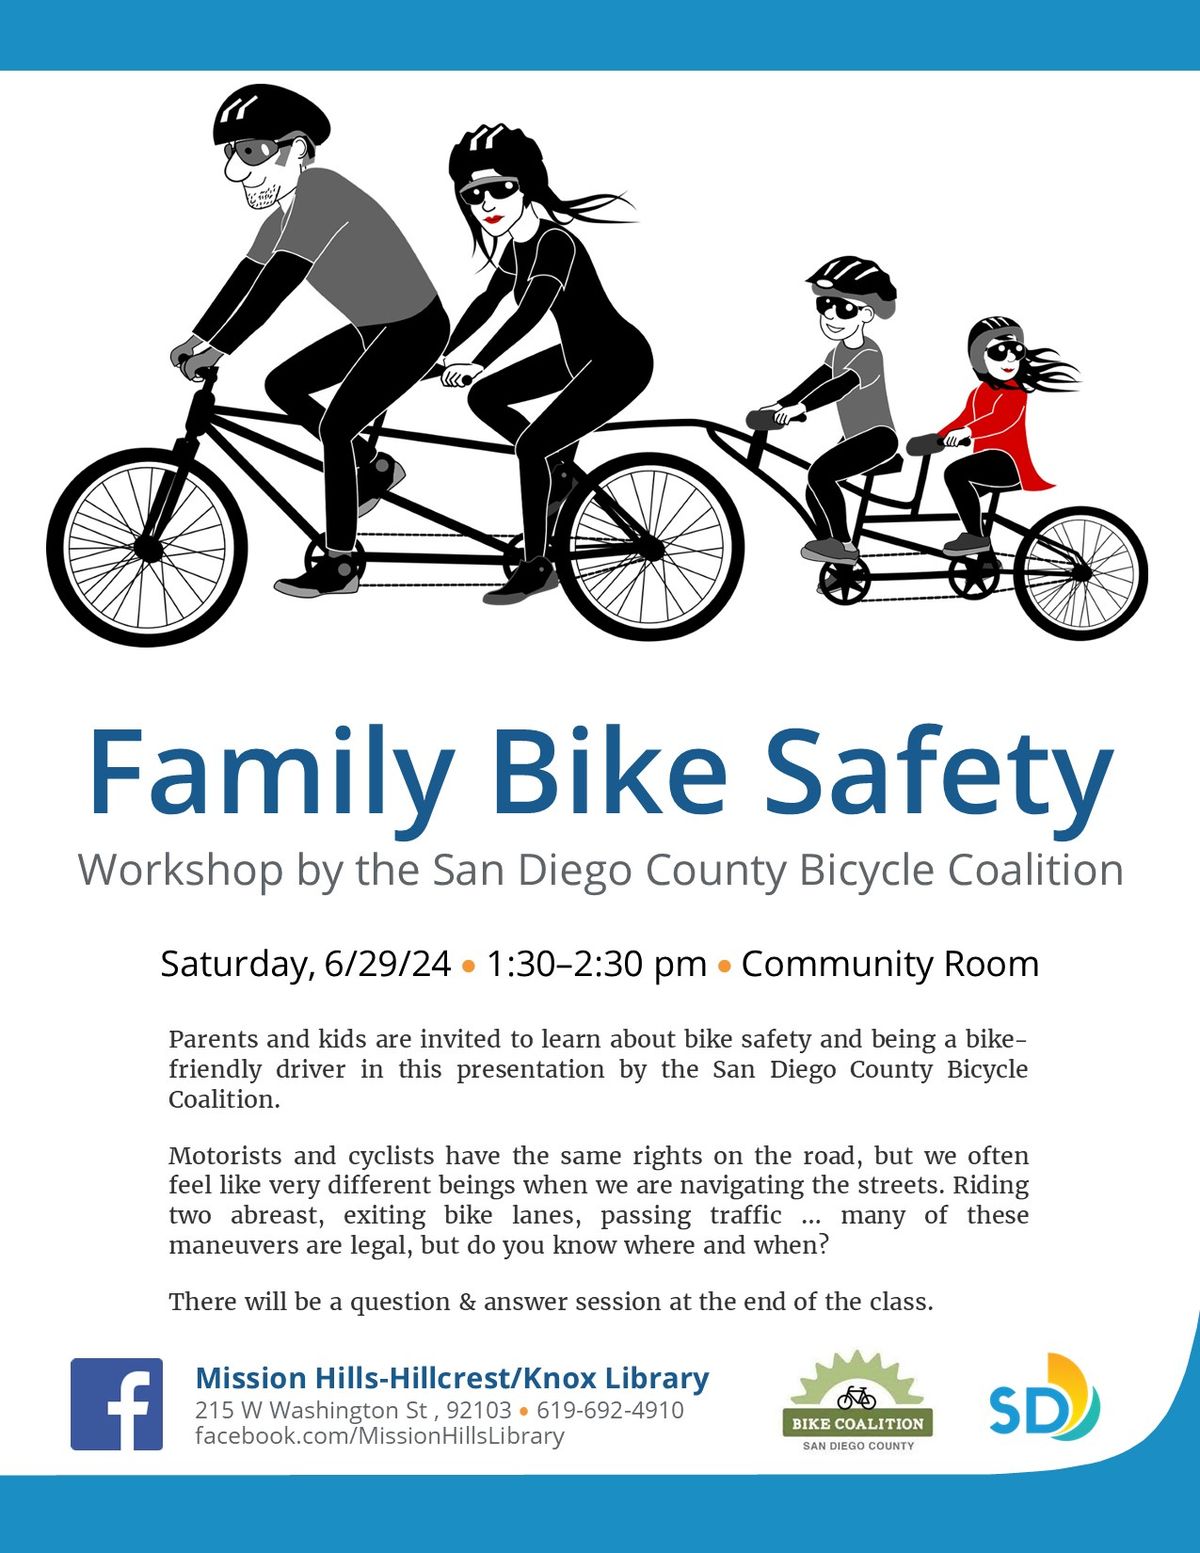 Family Bike Safety Workshop by the San Diego Bicycle Coalition